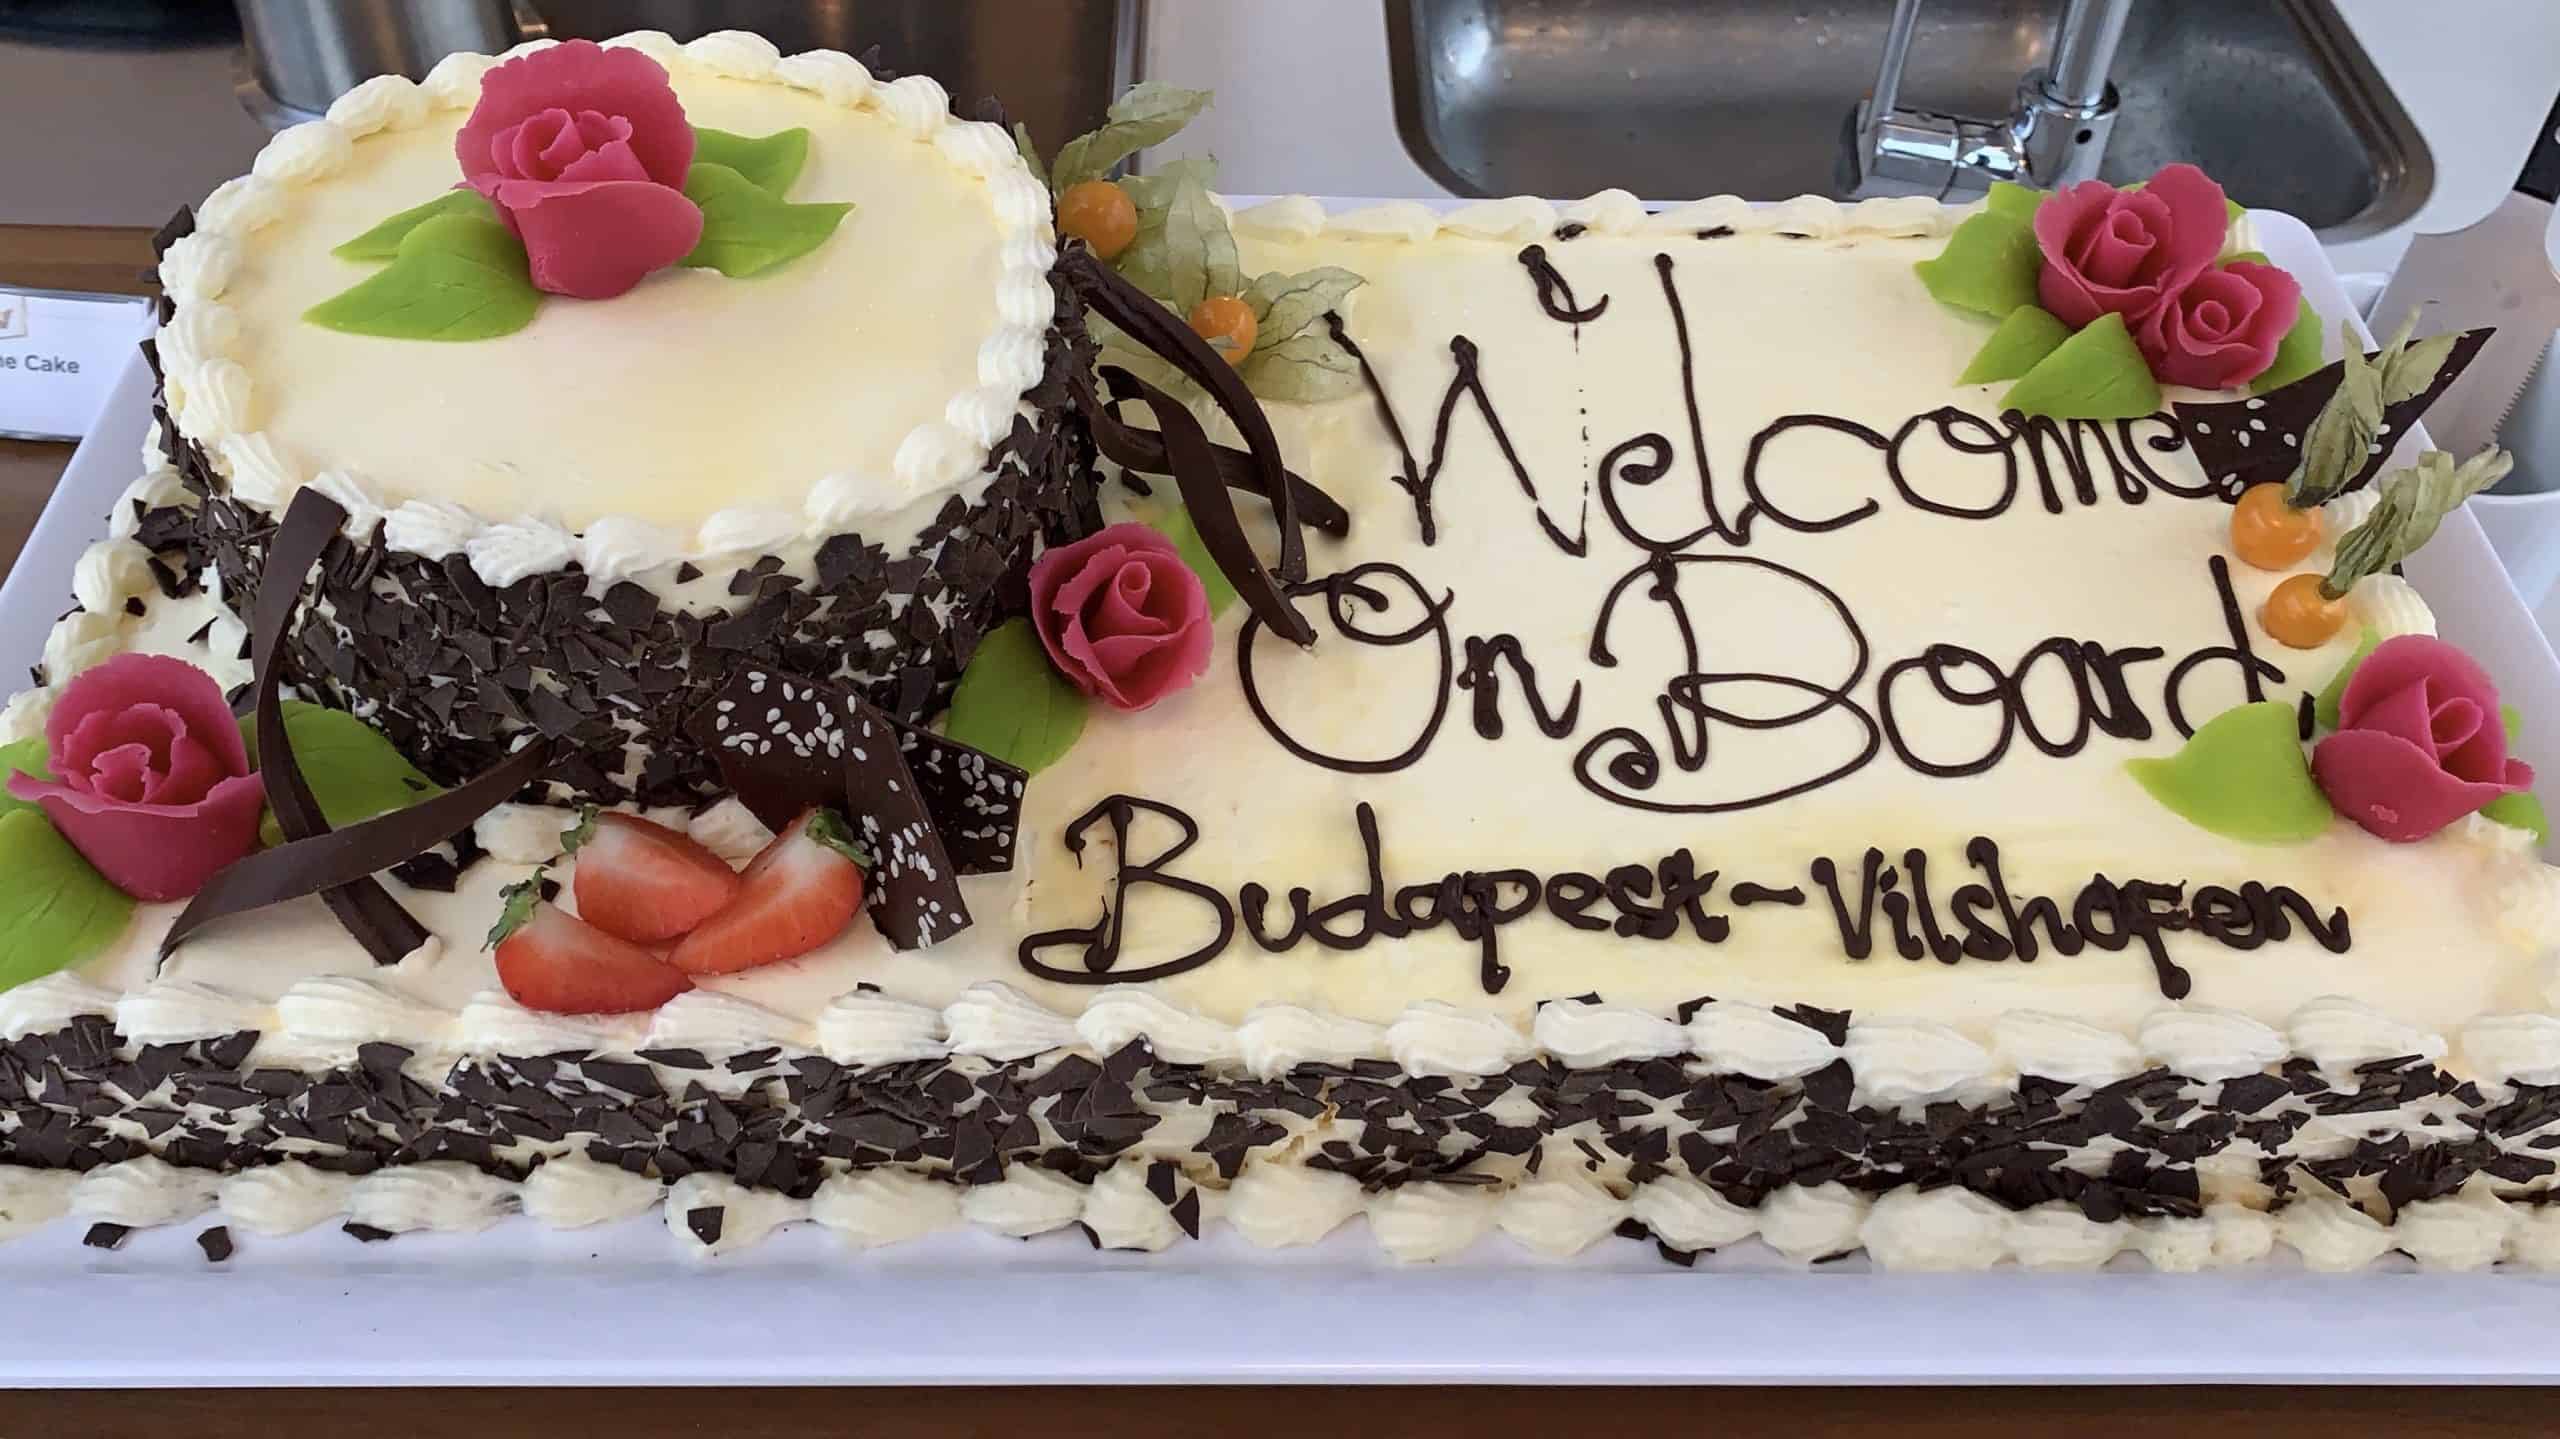 welcome on board cake